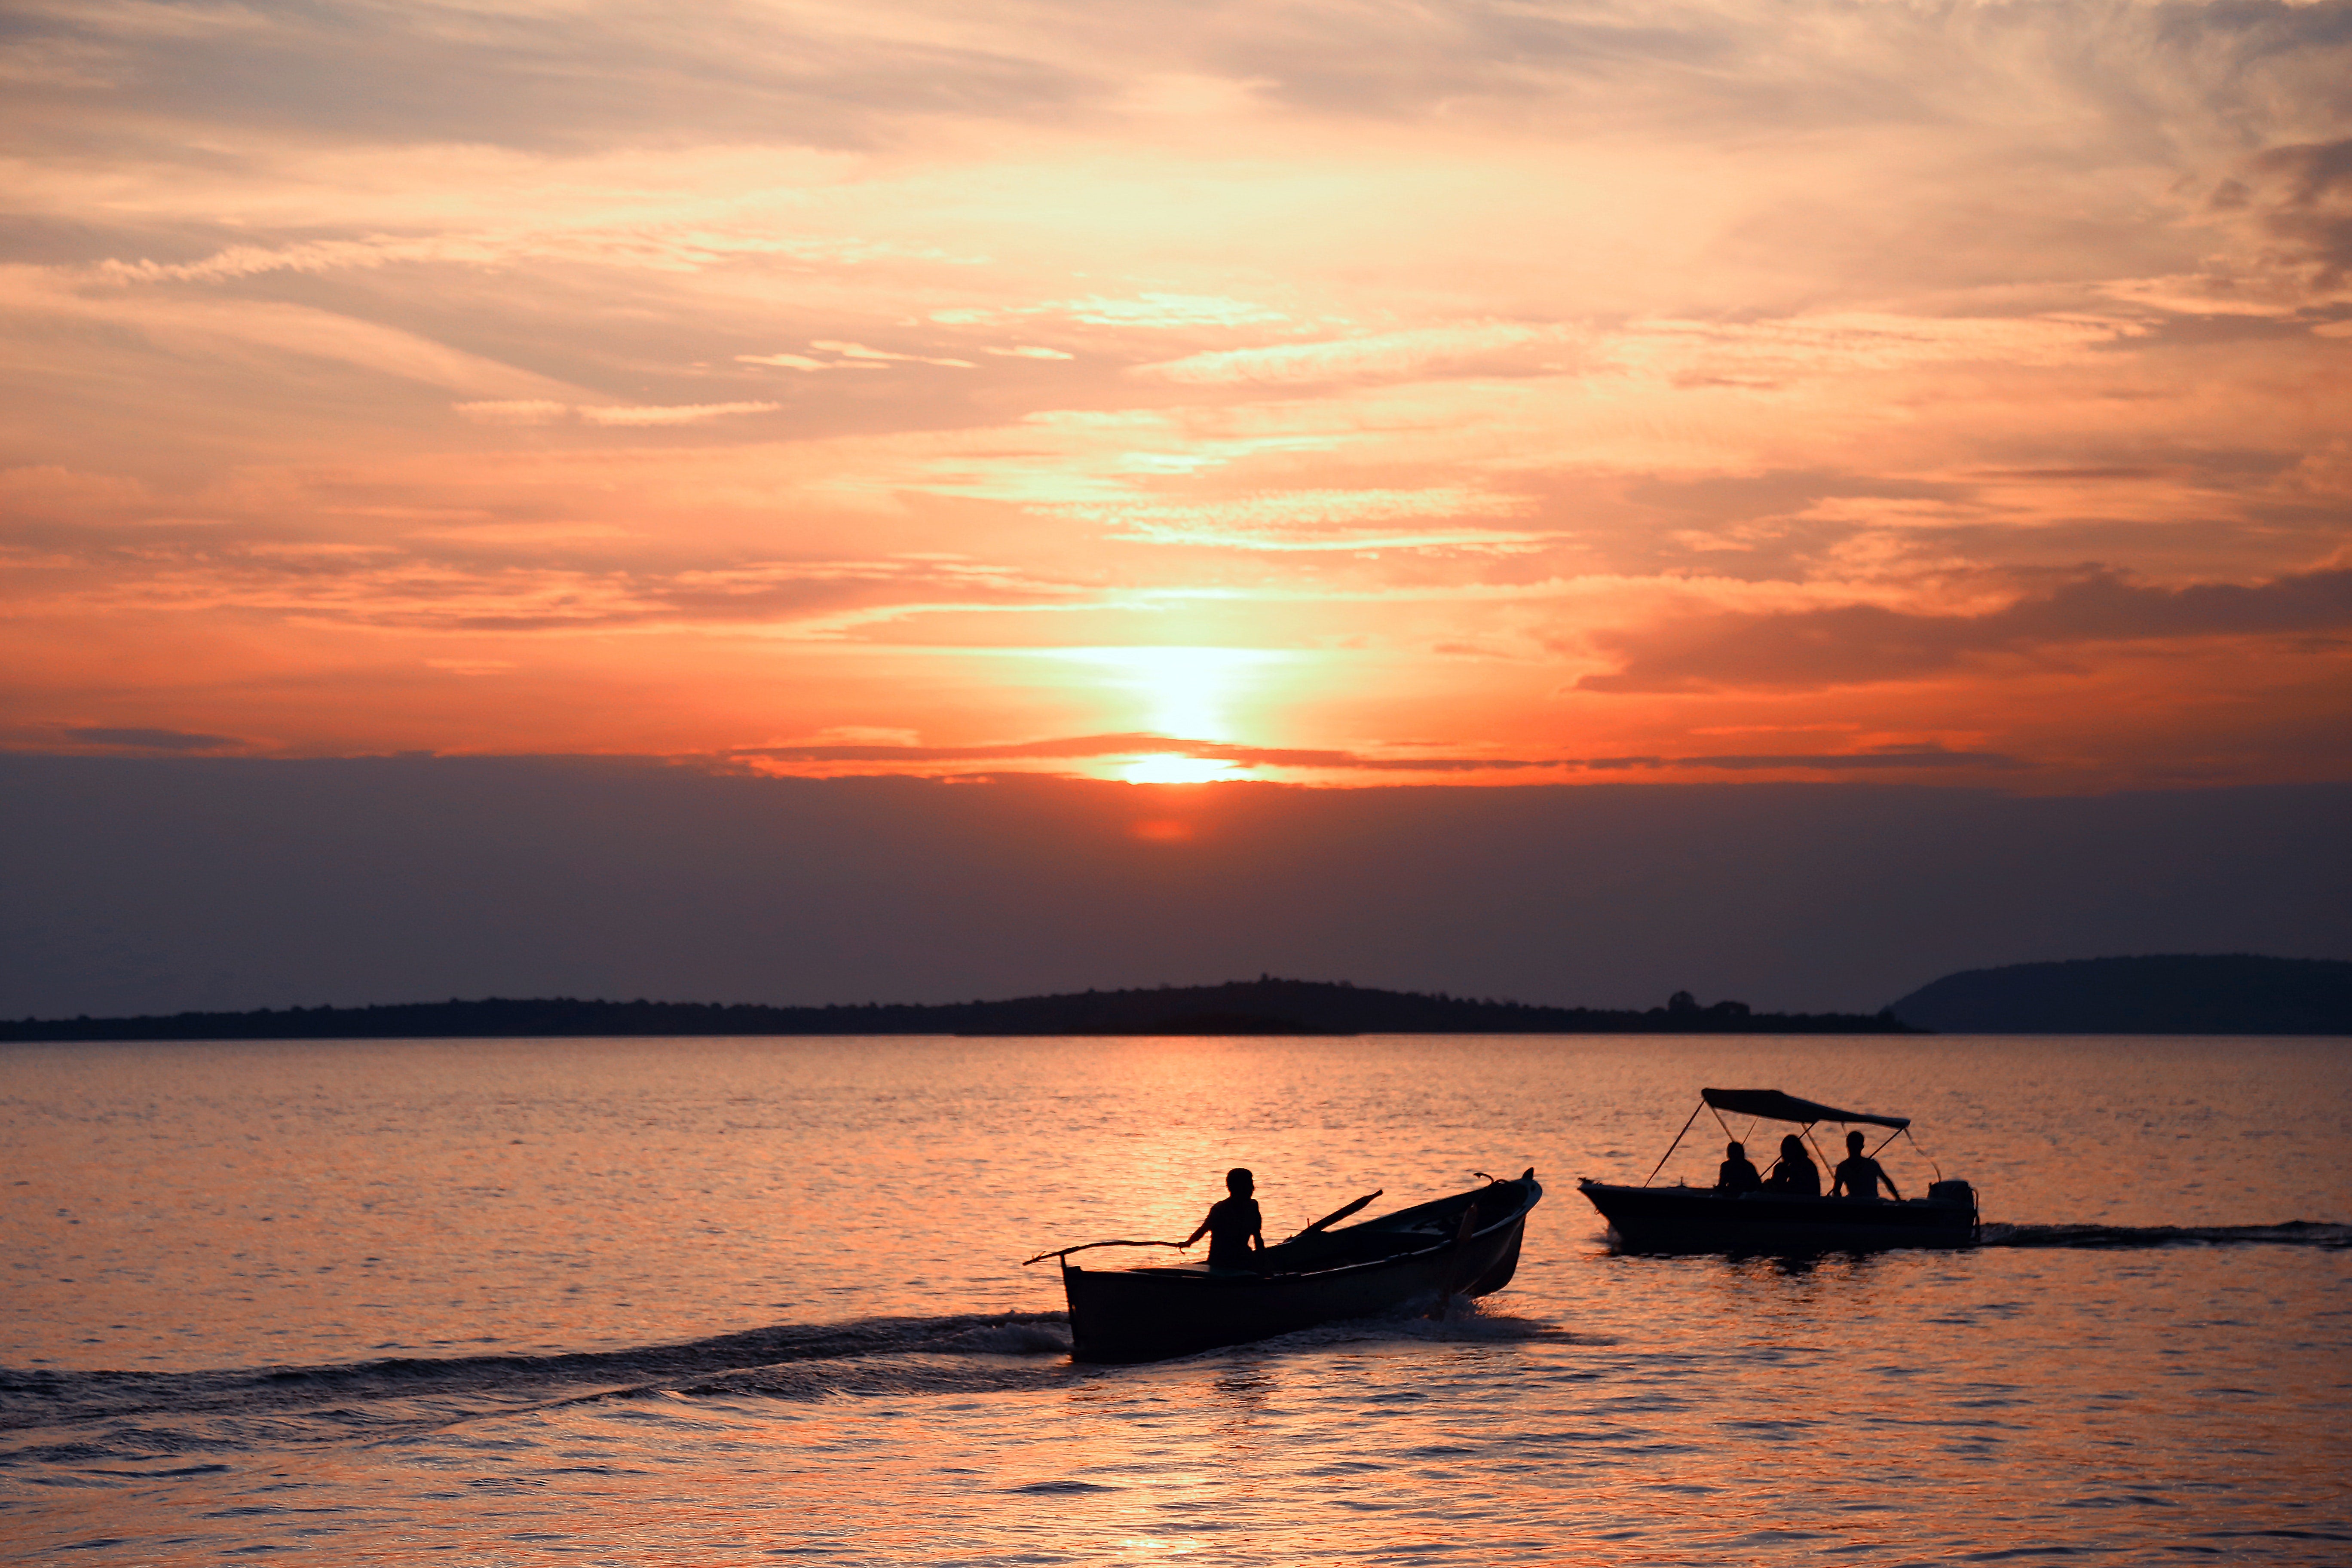 Two men fishing in boat sunset sky sea shore mountains - Stock